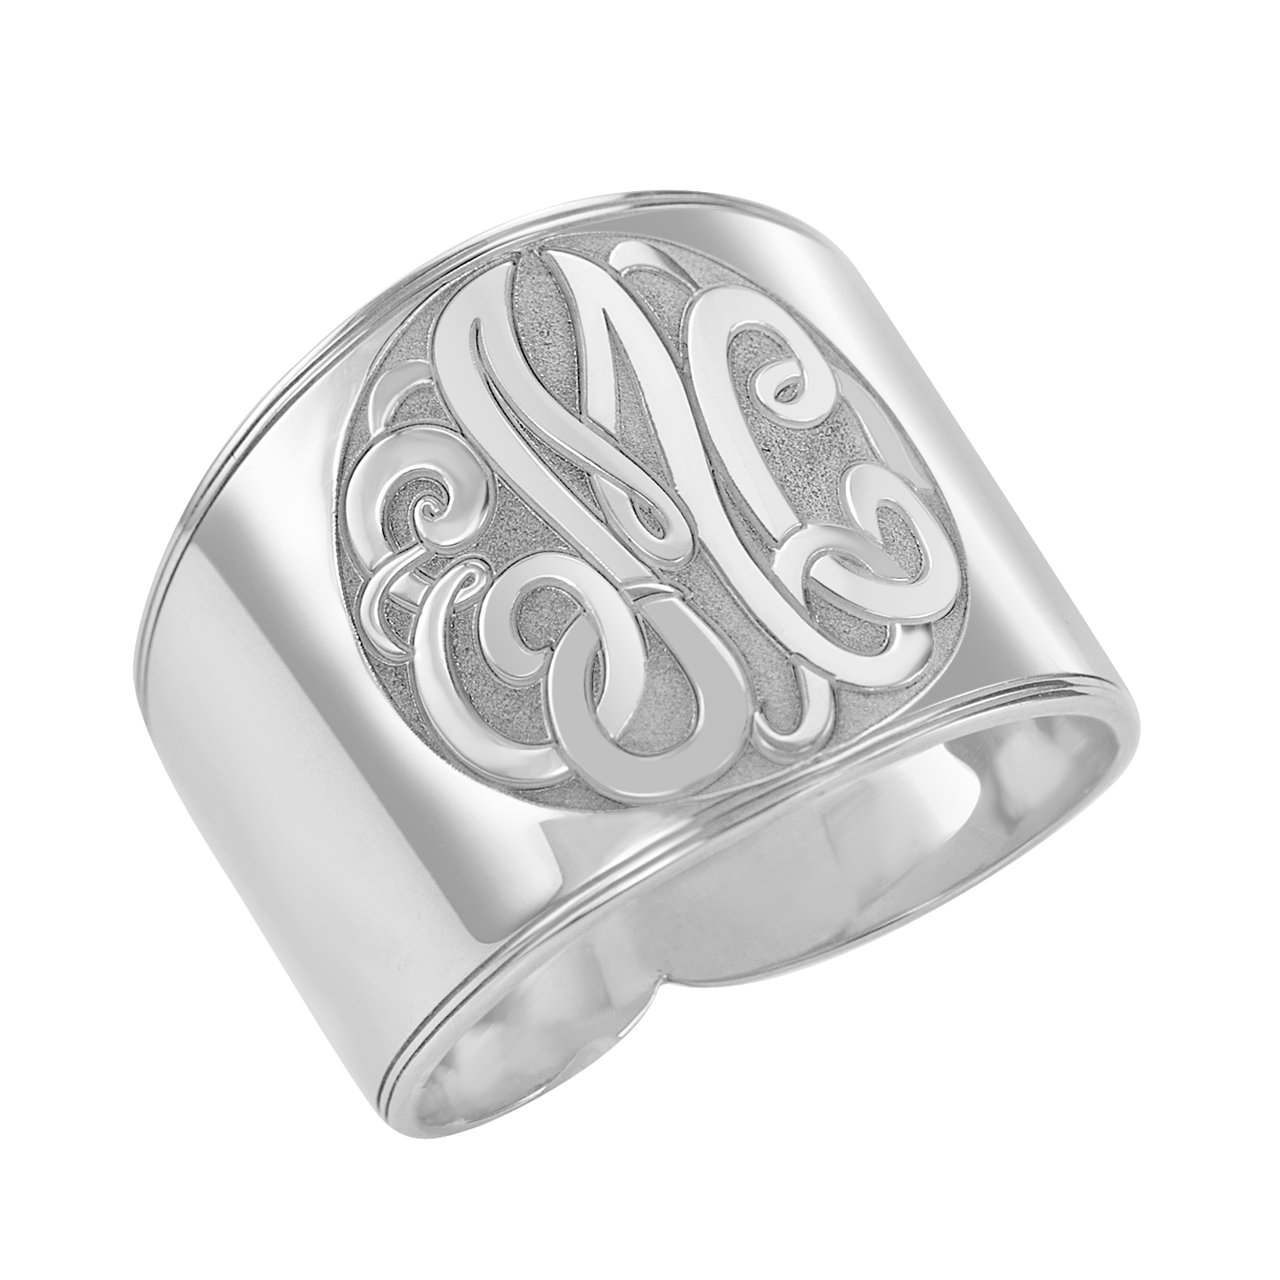 Cigar Band Monogram Ring, Personalized Jewelry